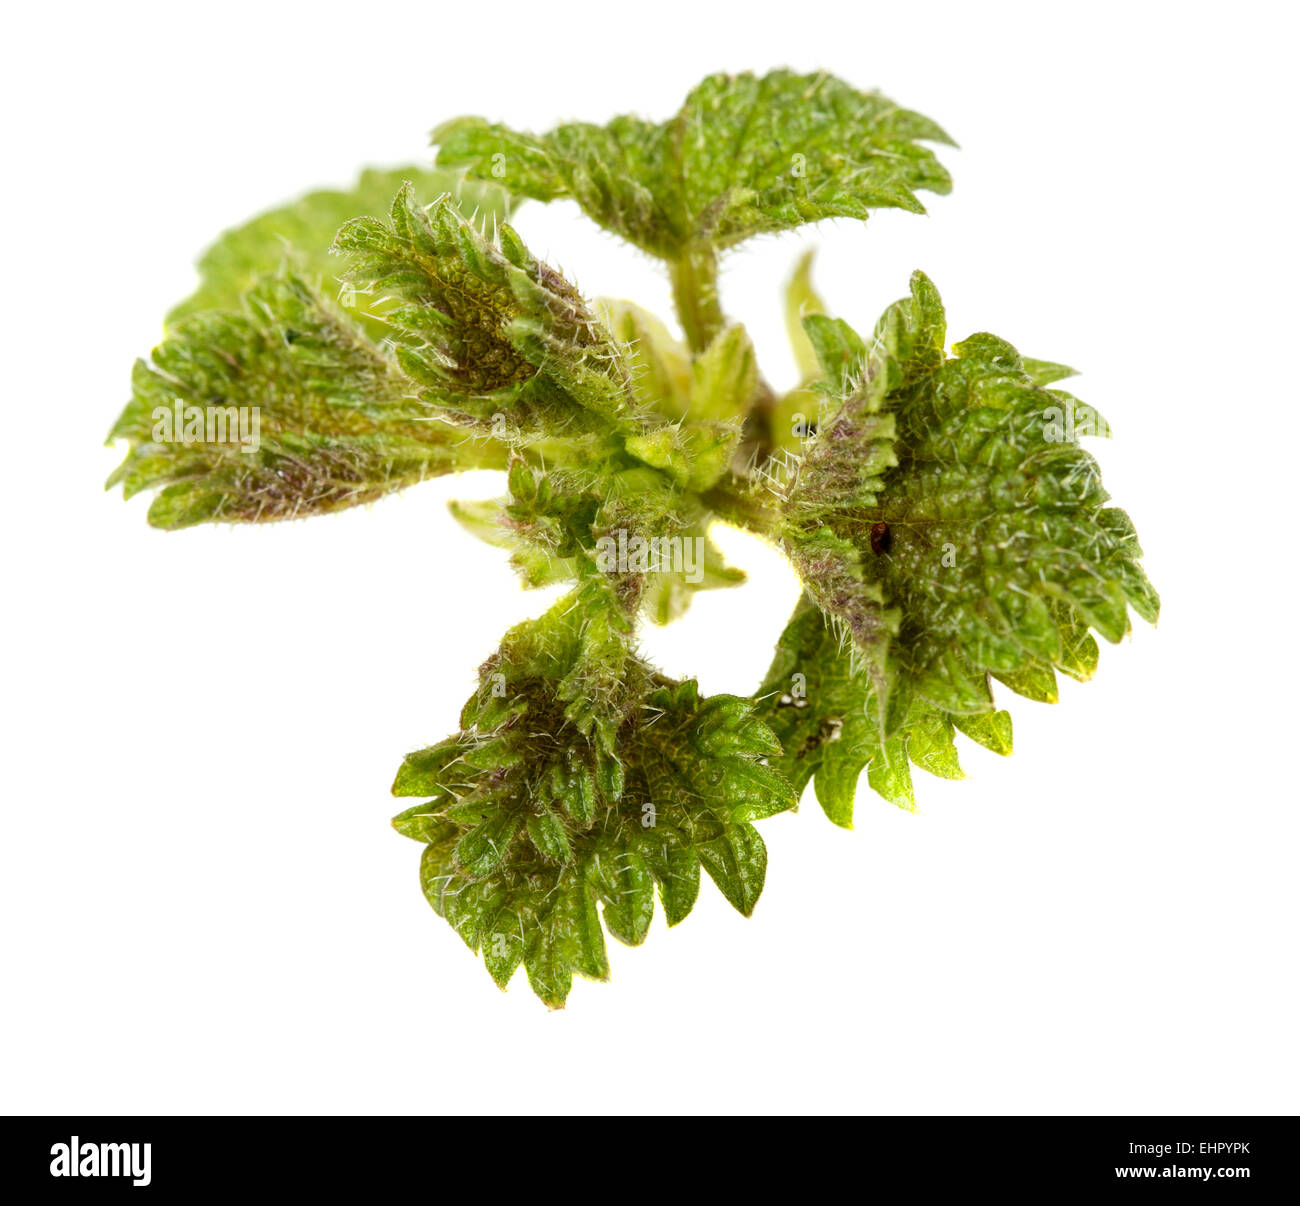 Stinging nettle (Urtica dioica) isolated over white background Stock Photo